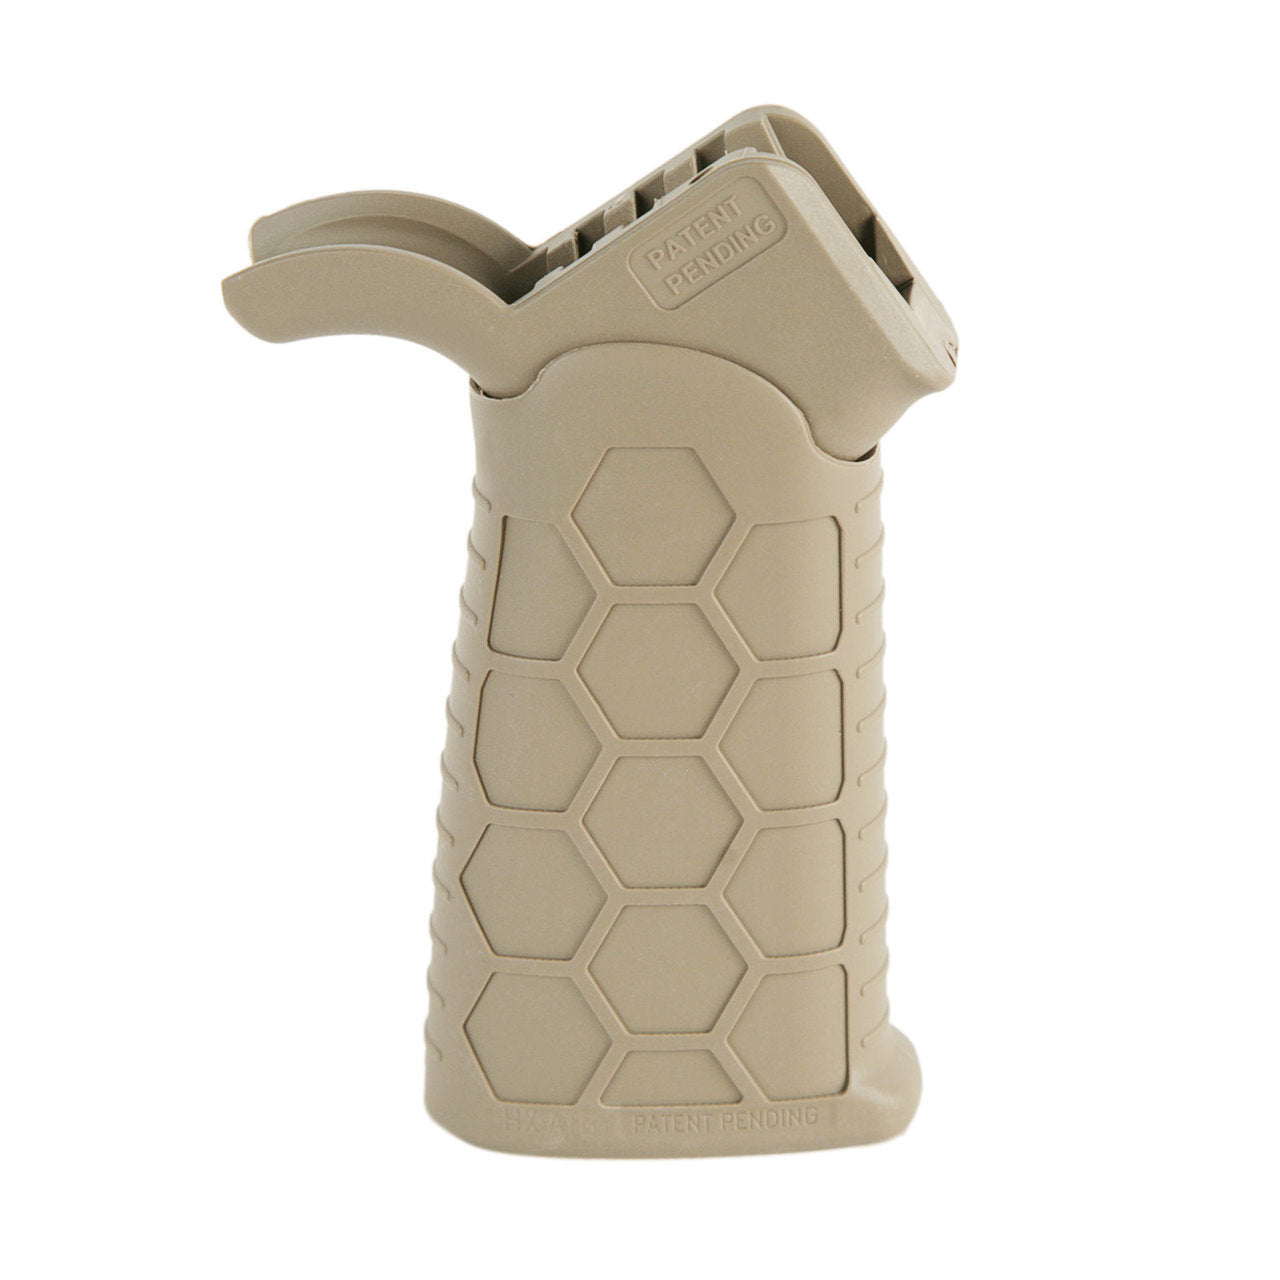 Hexmag Advanced Tactical Grip for AR-15 and AR-10 - Newest Products